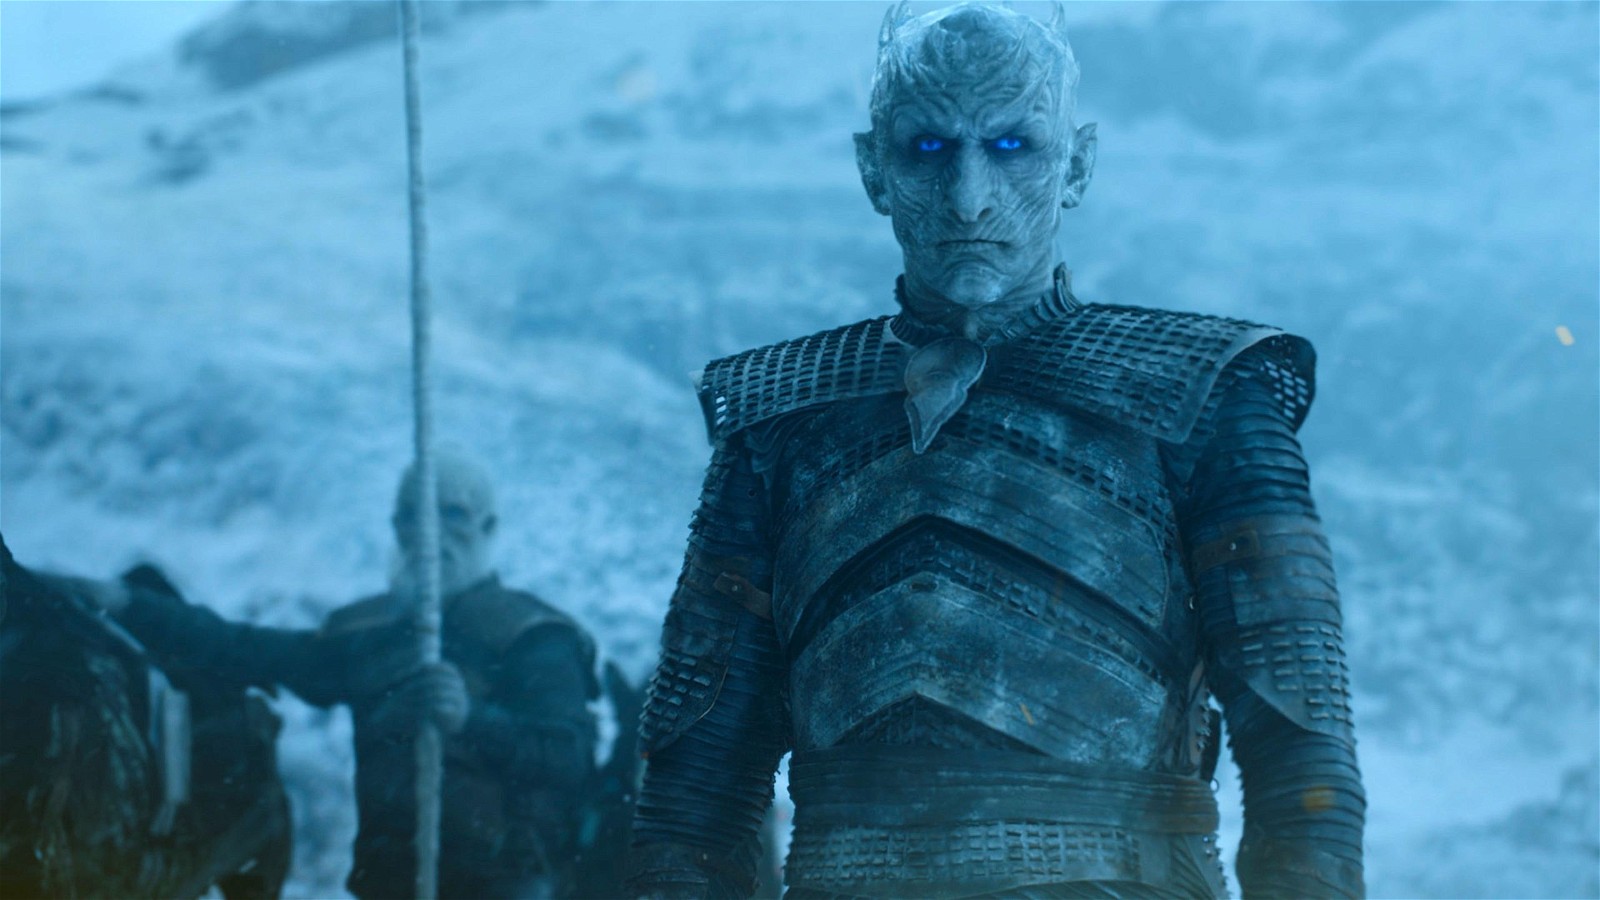 WB receives criticism for milking out more Game of Thrones spinoffs